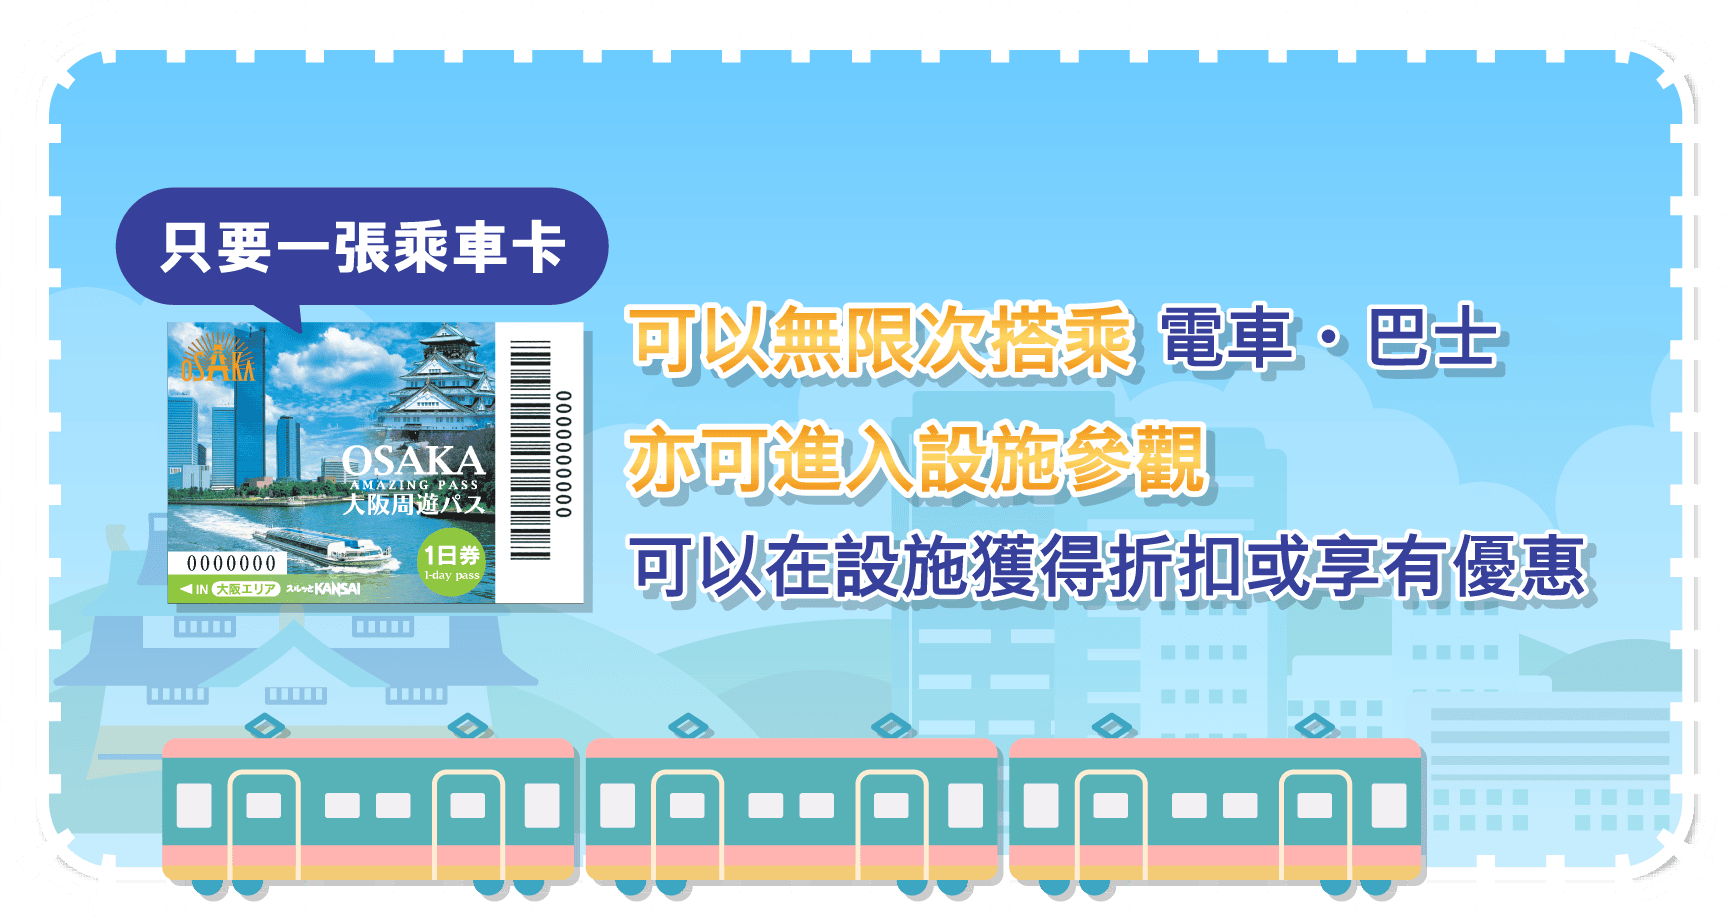 Allows you entry into approximately 40 sightseeing spots! Free one-day ride on buses and trains!Approximately 30 facilities and stores on special offers!Saves money and convenient if you are travelling around Osaka Osaka Amazing Pass!